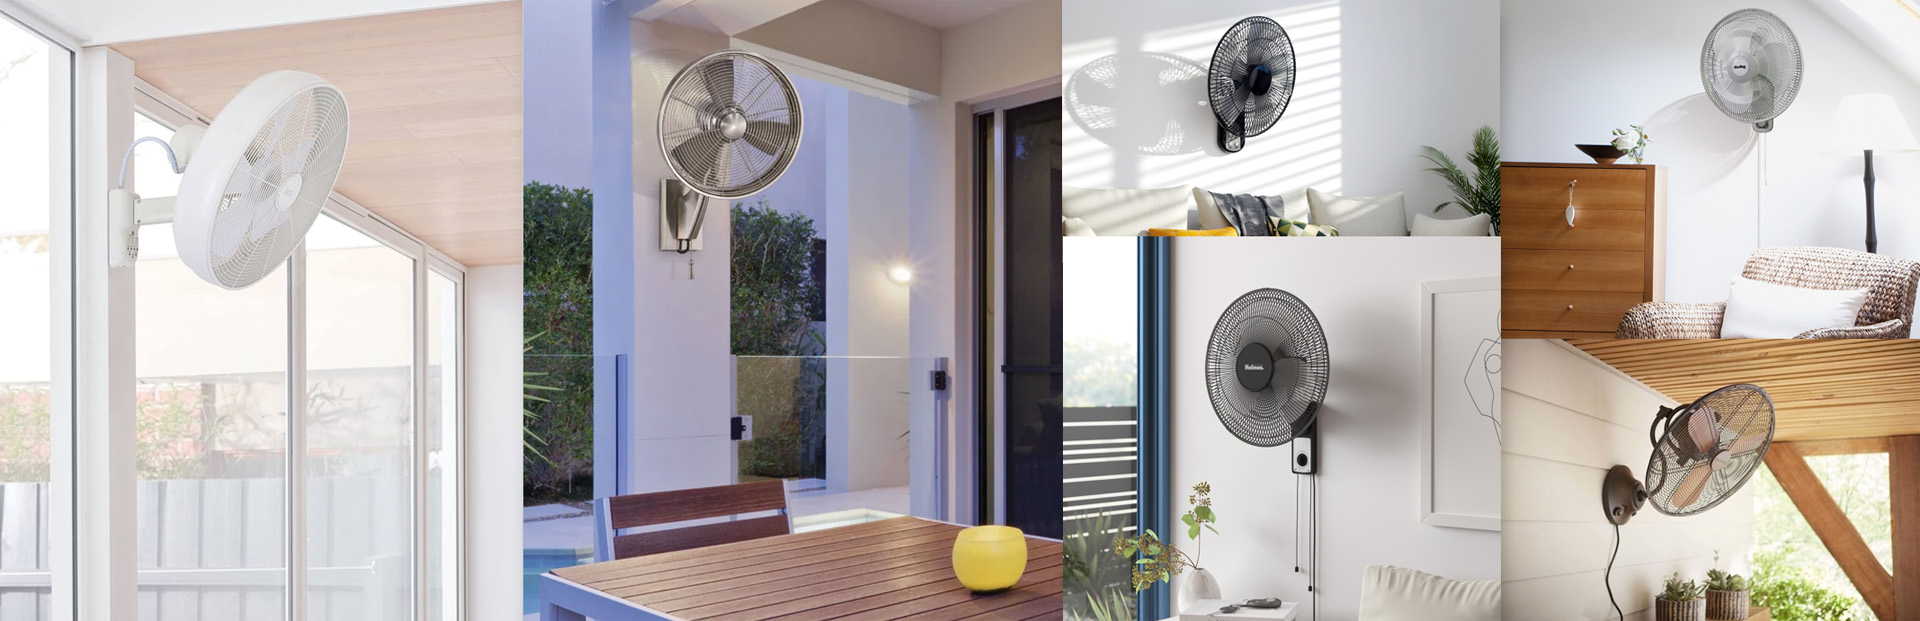 wall-mounted fan manufacturer & supplier produce wall mounting fans in plastic & metal, remote & Alexa control models